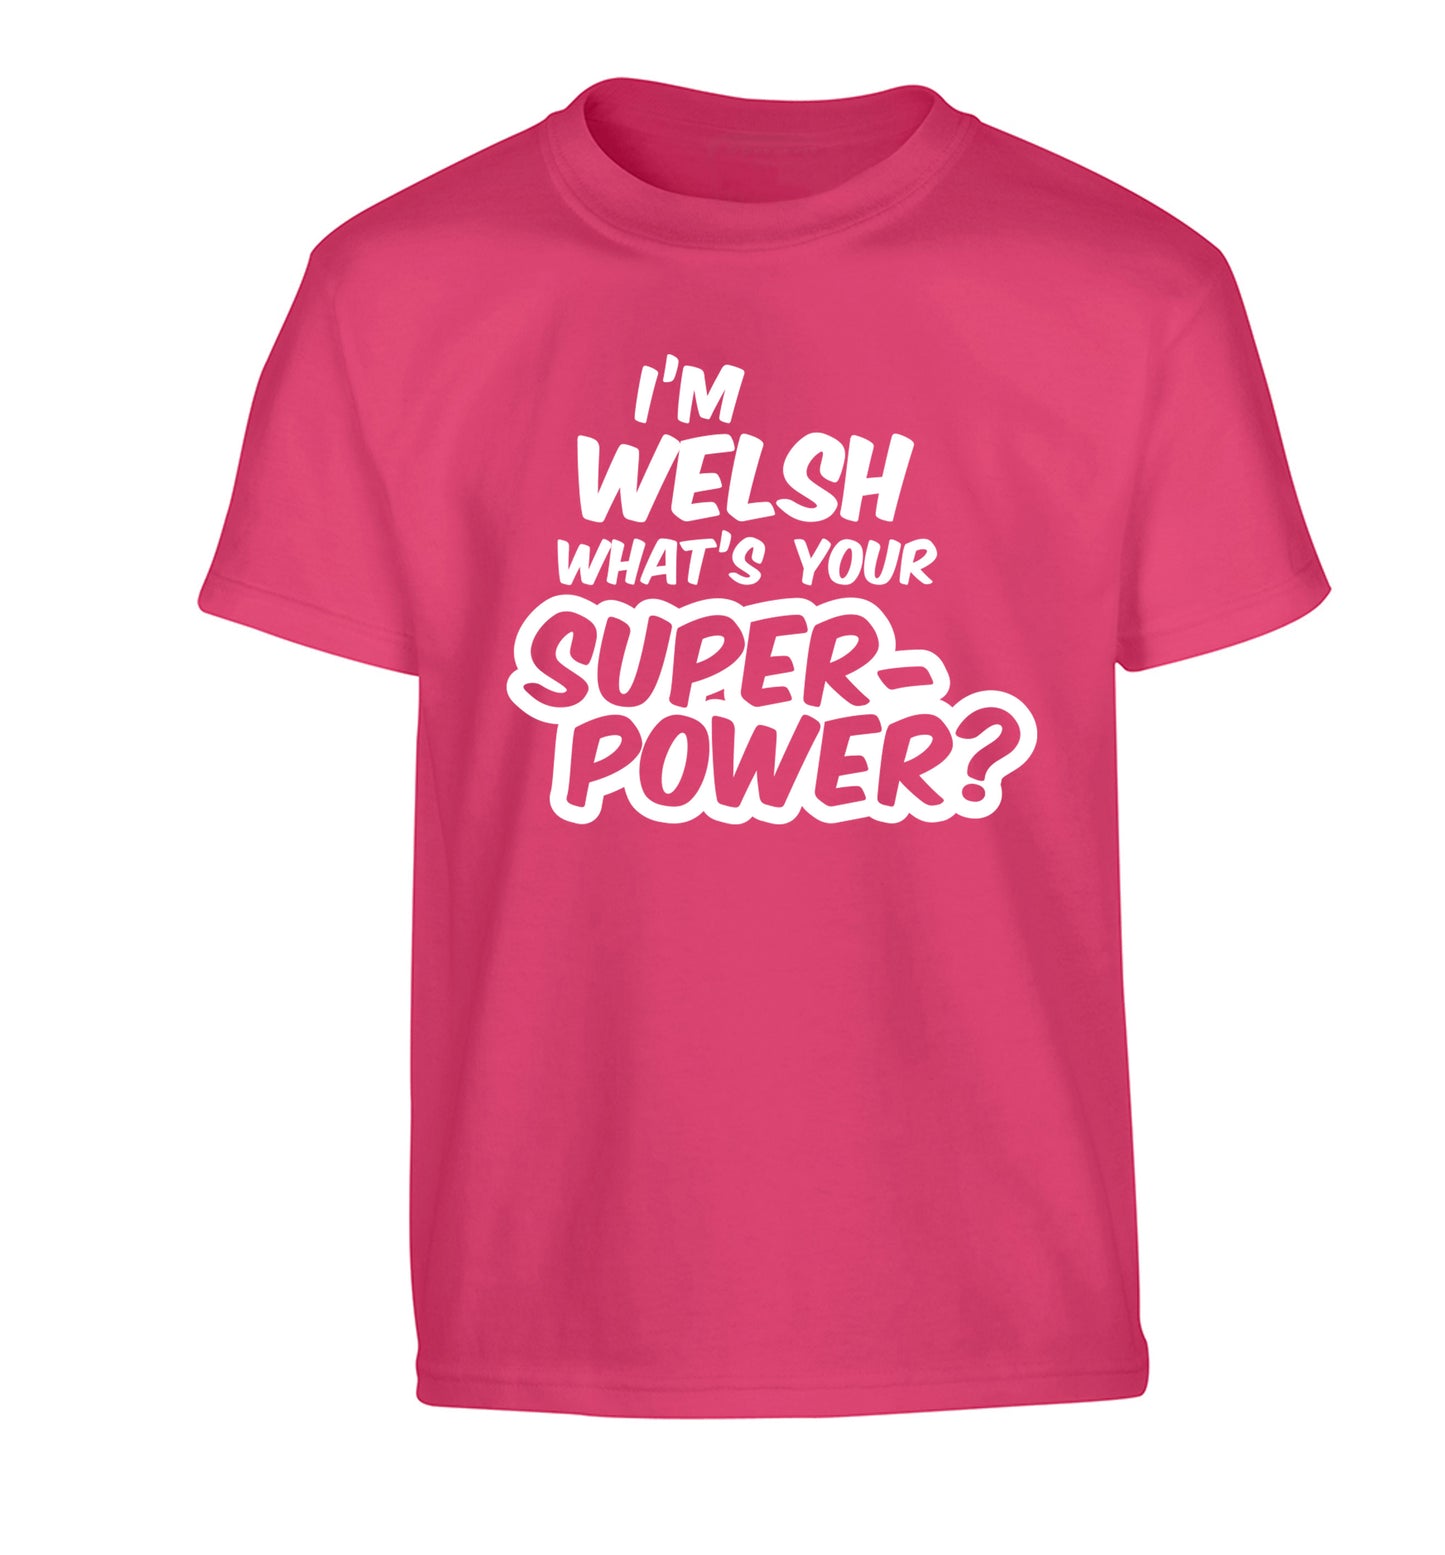 I'm Welsh what's your superpower? Children's pink Tshirt 12-13 Years